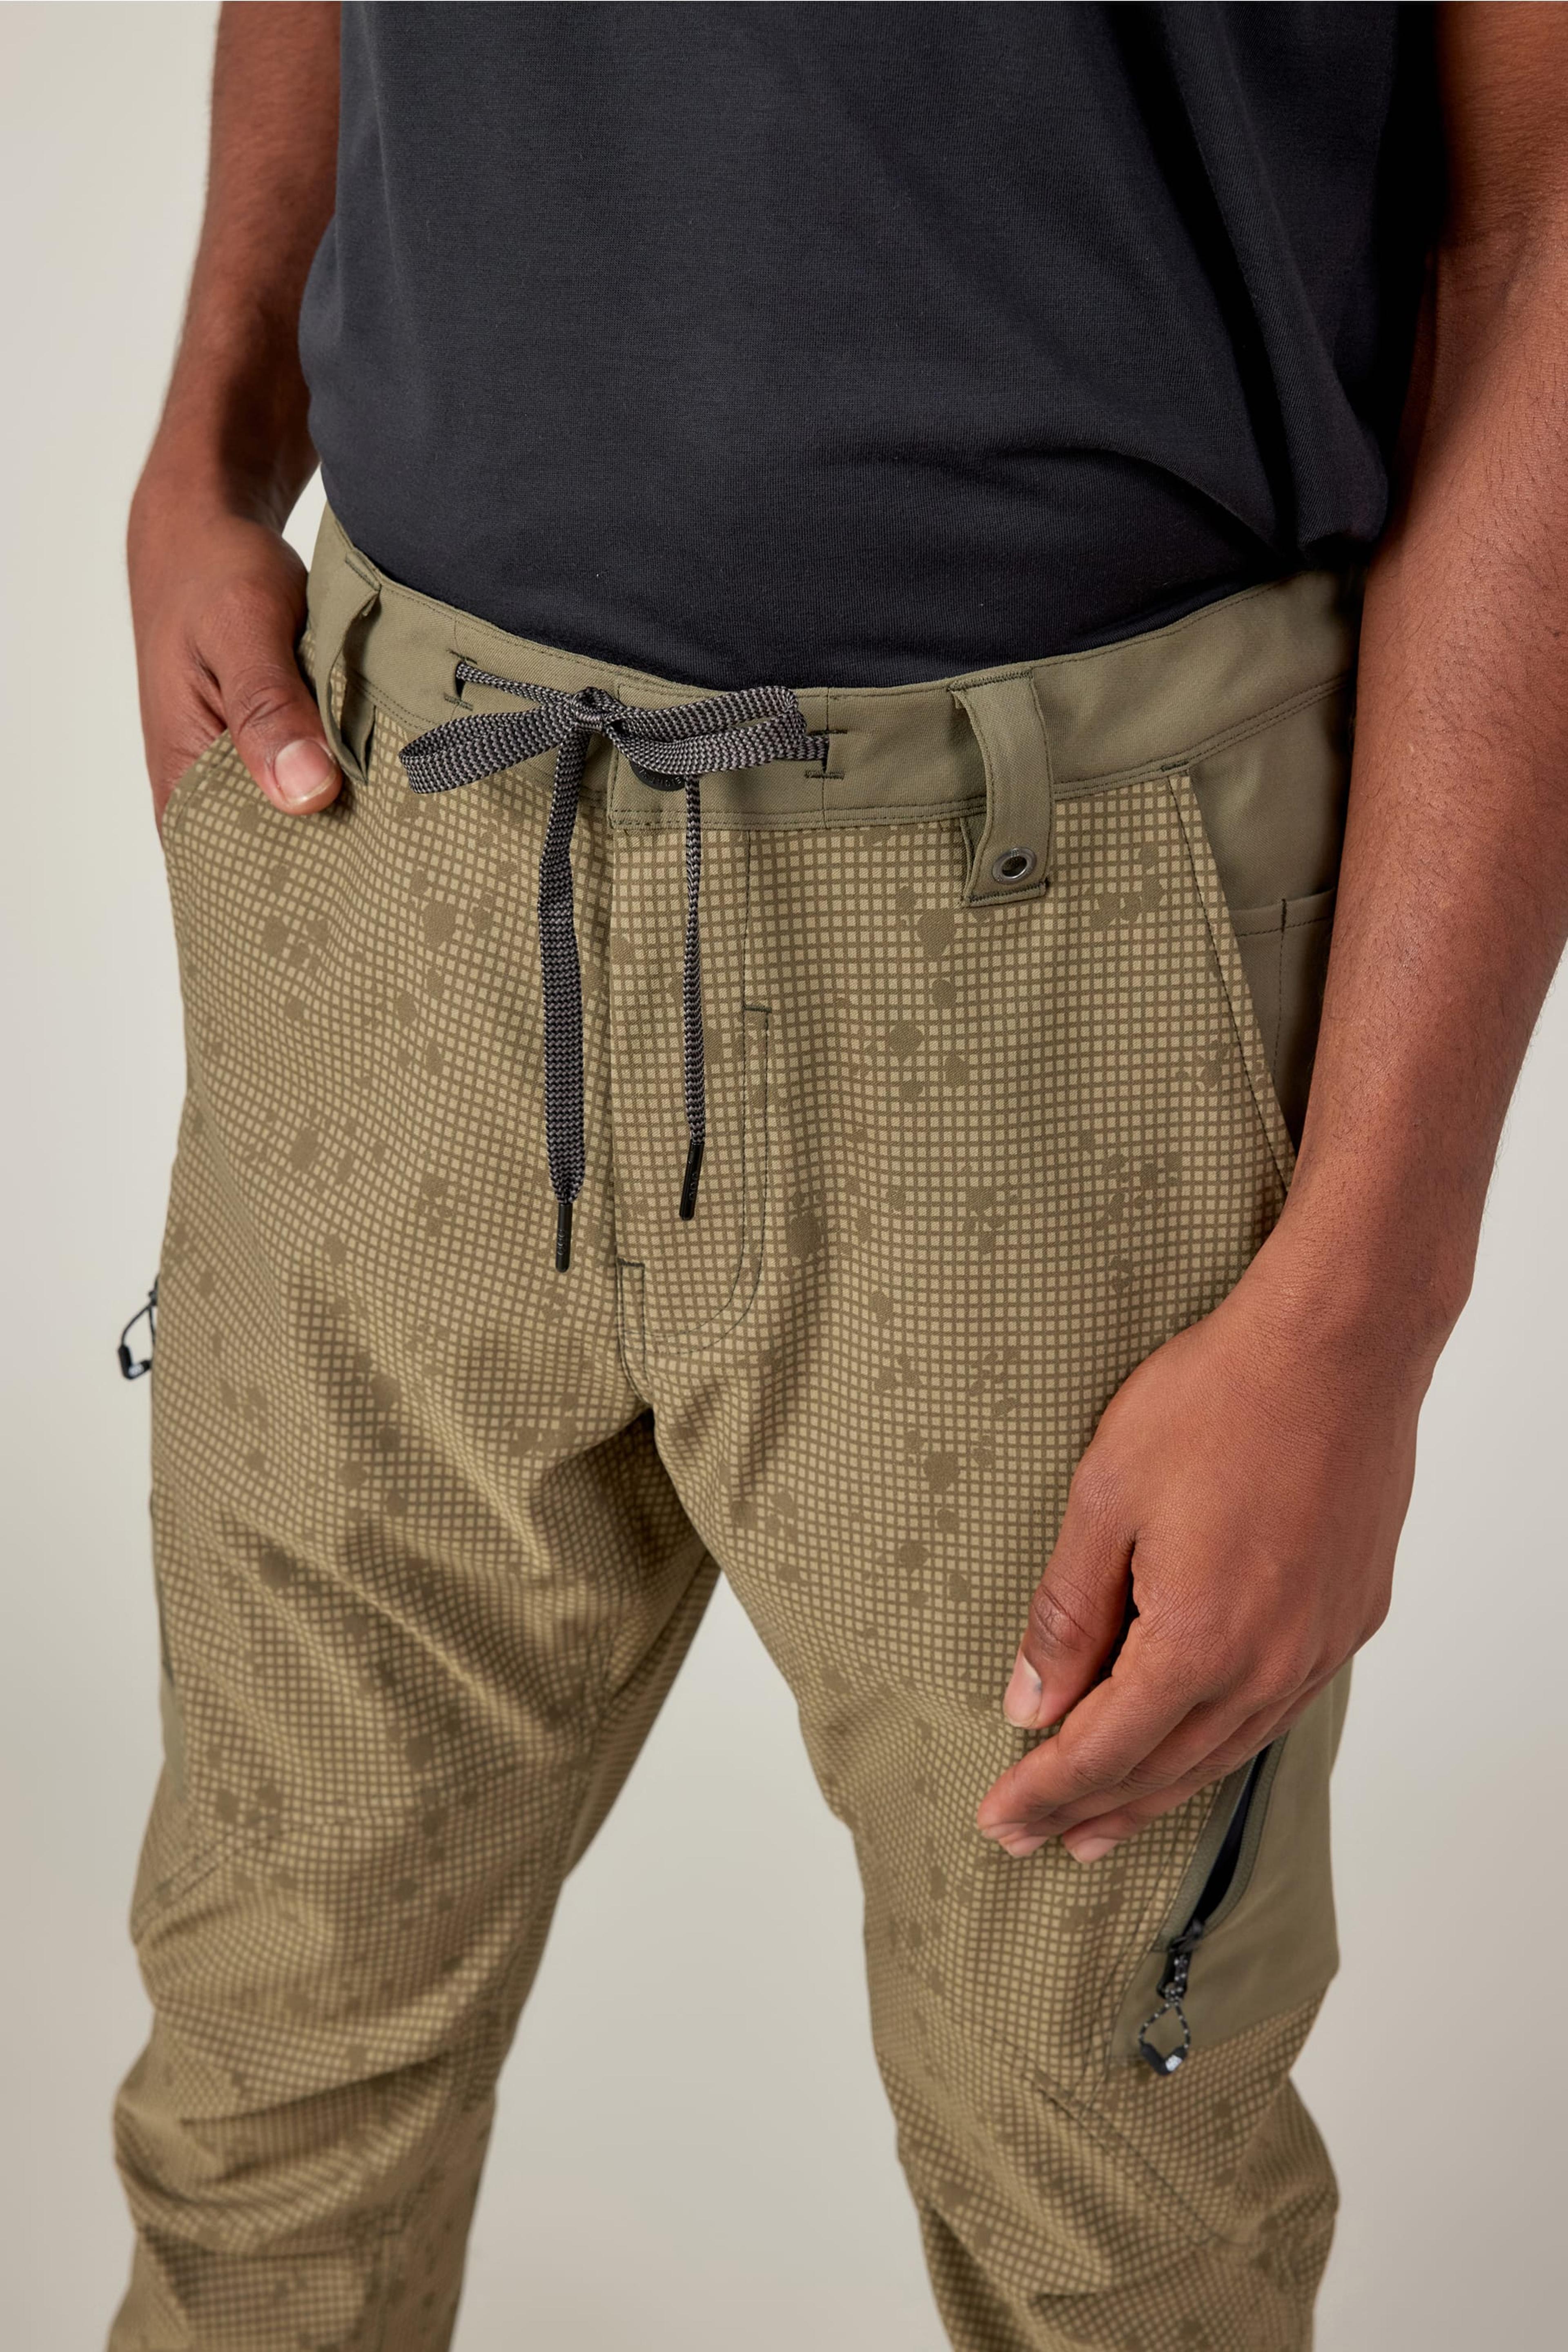 Alternate View 94 of 686 Men's Anything Cargo Pant - Slim Fit